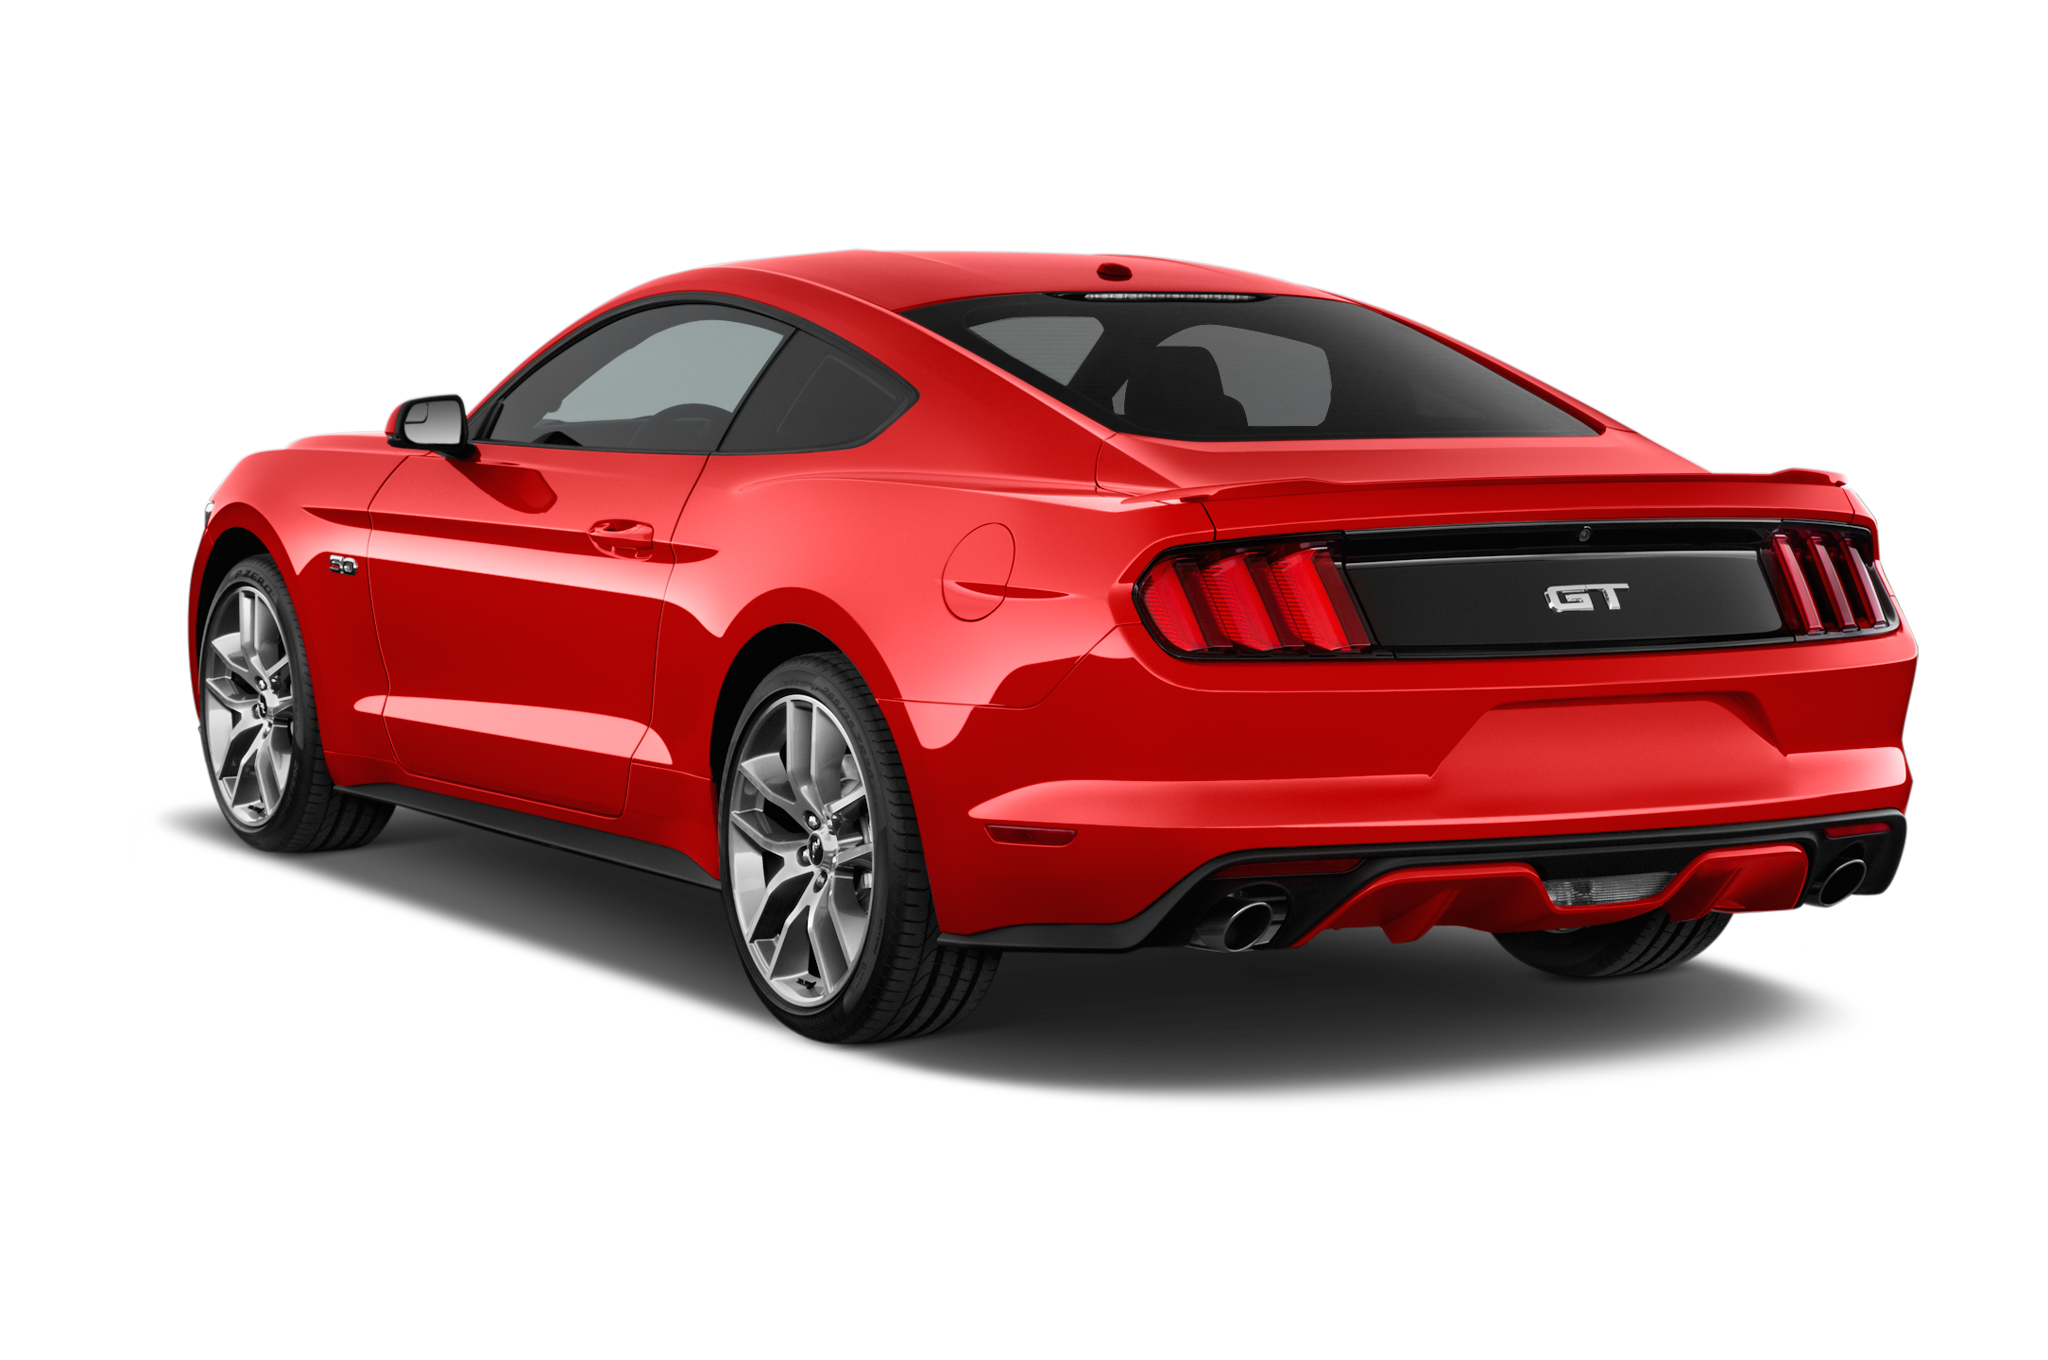 Ford Mustang Gt 50 Years Limited Edition 2015 International Price